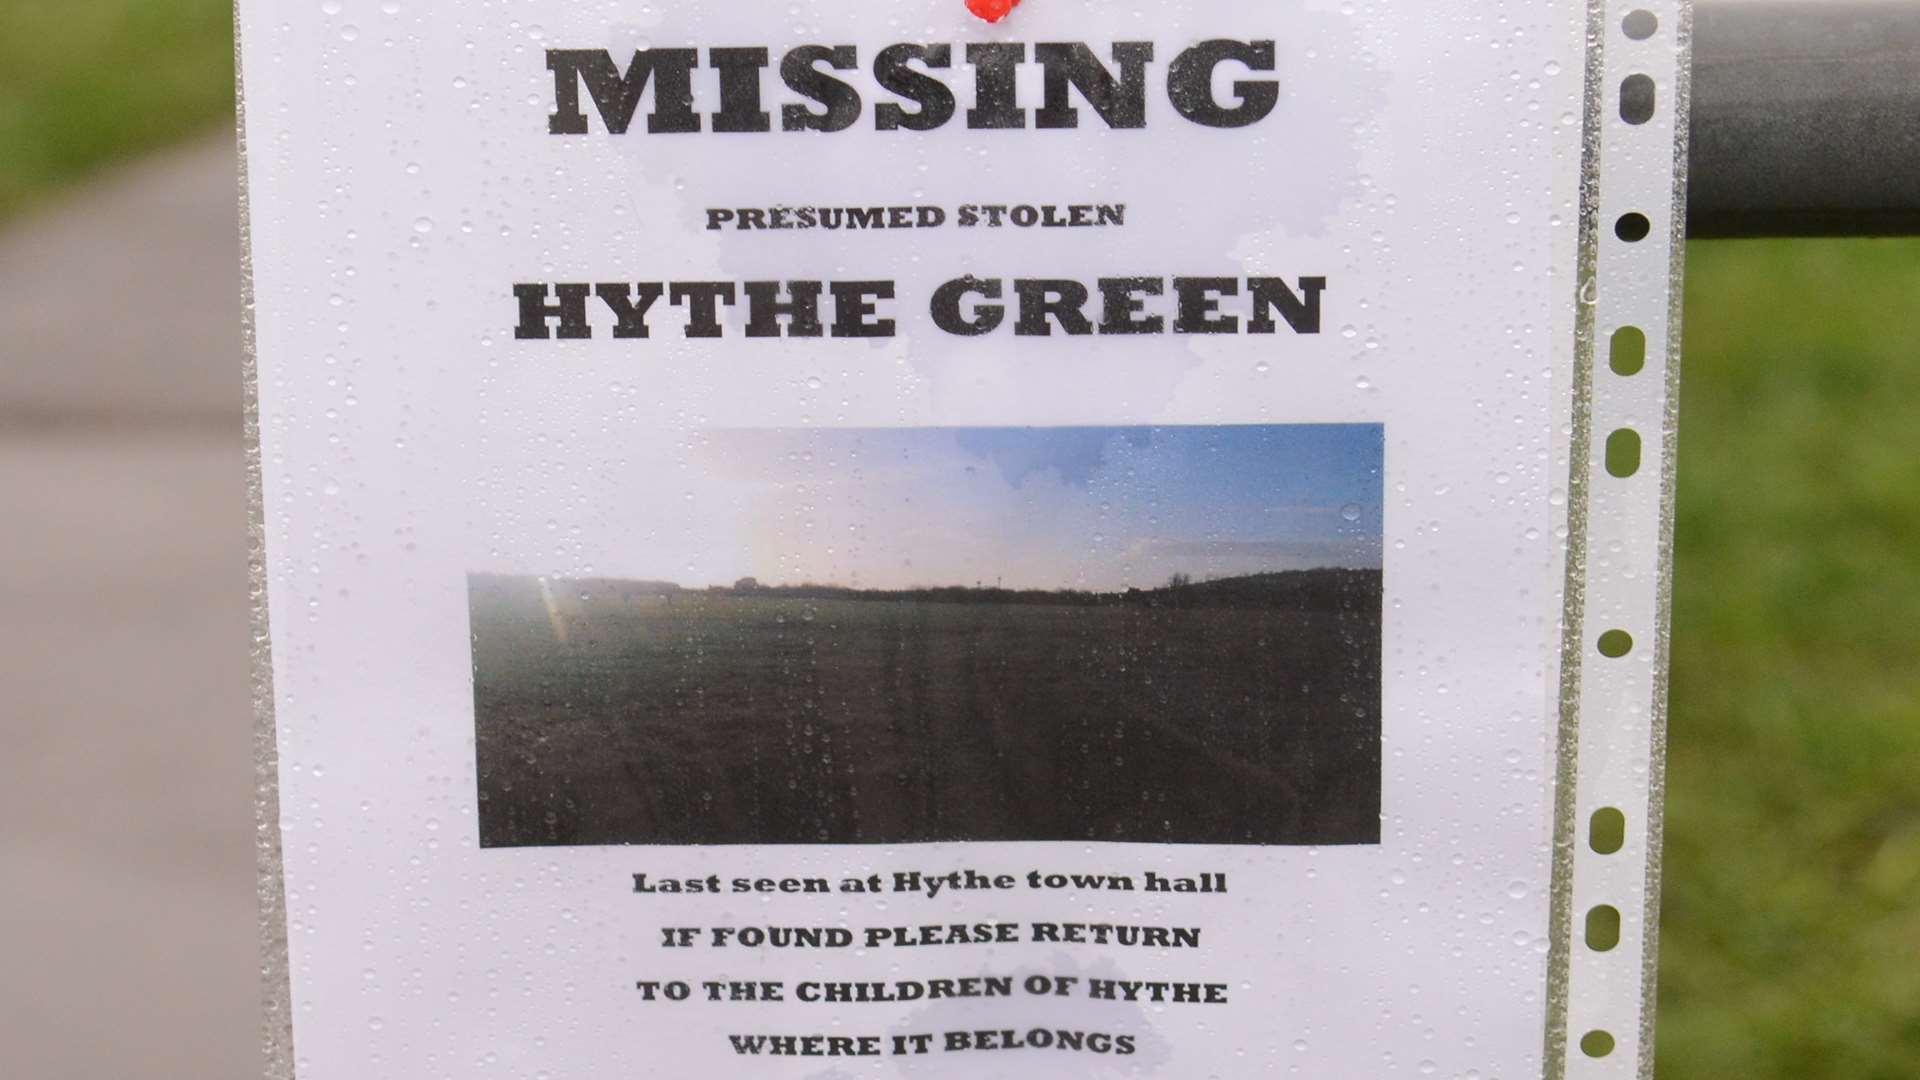 Missing posters for The Green have been posted around Hythe. Picture: Gary Browne